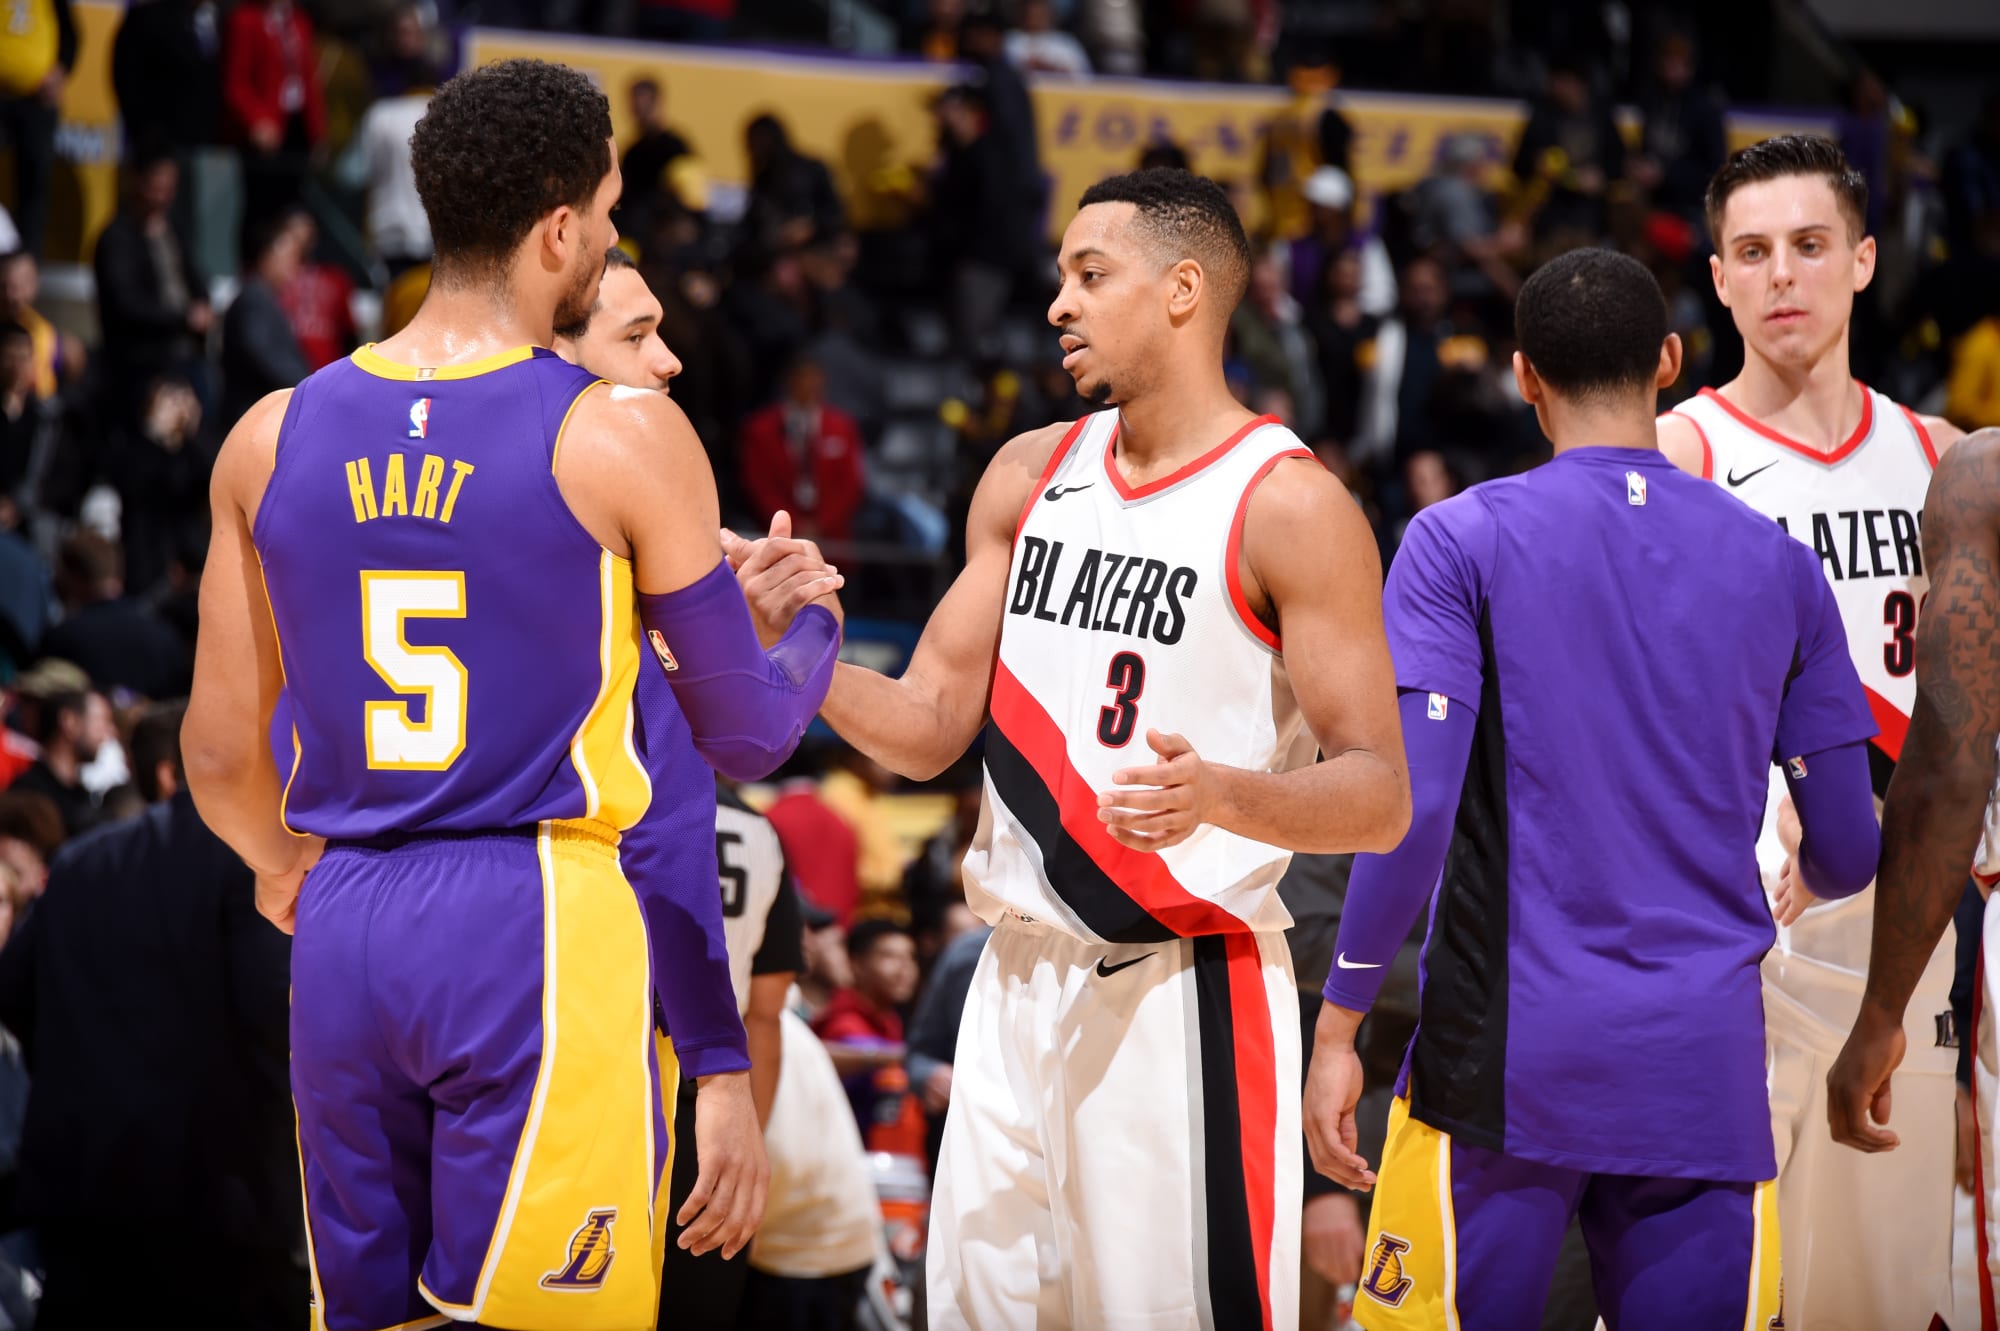 Los Angeles Lakers vs Portland Trail Blazers How to watch, listen to game